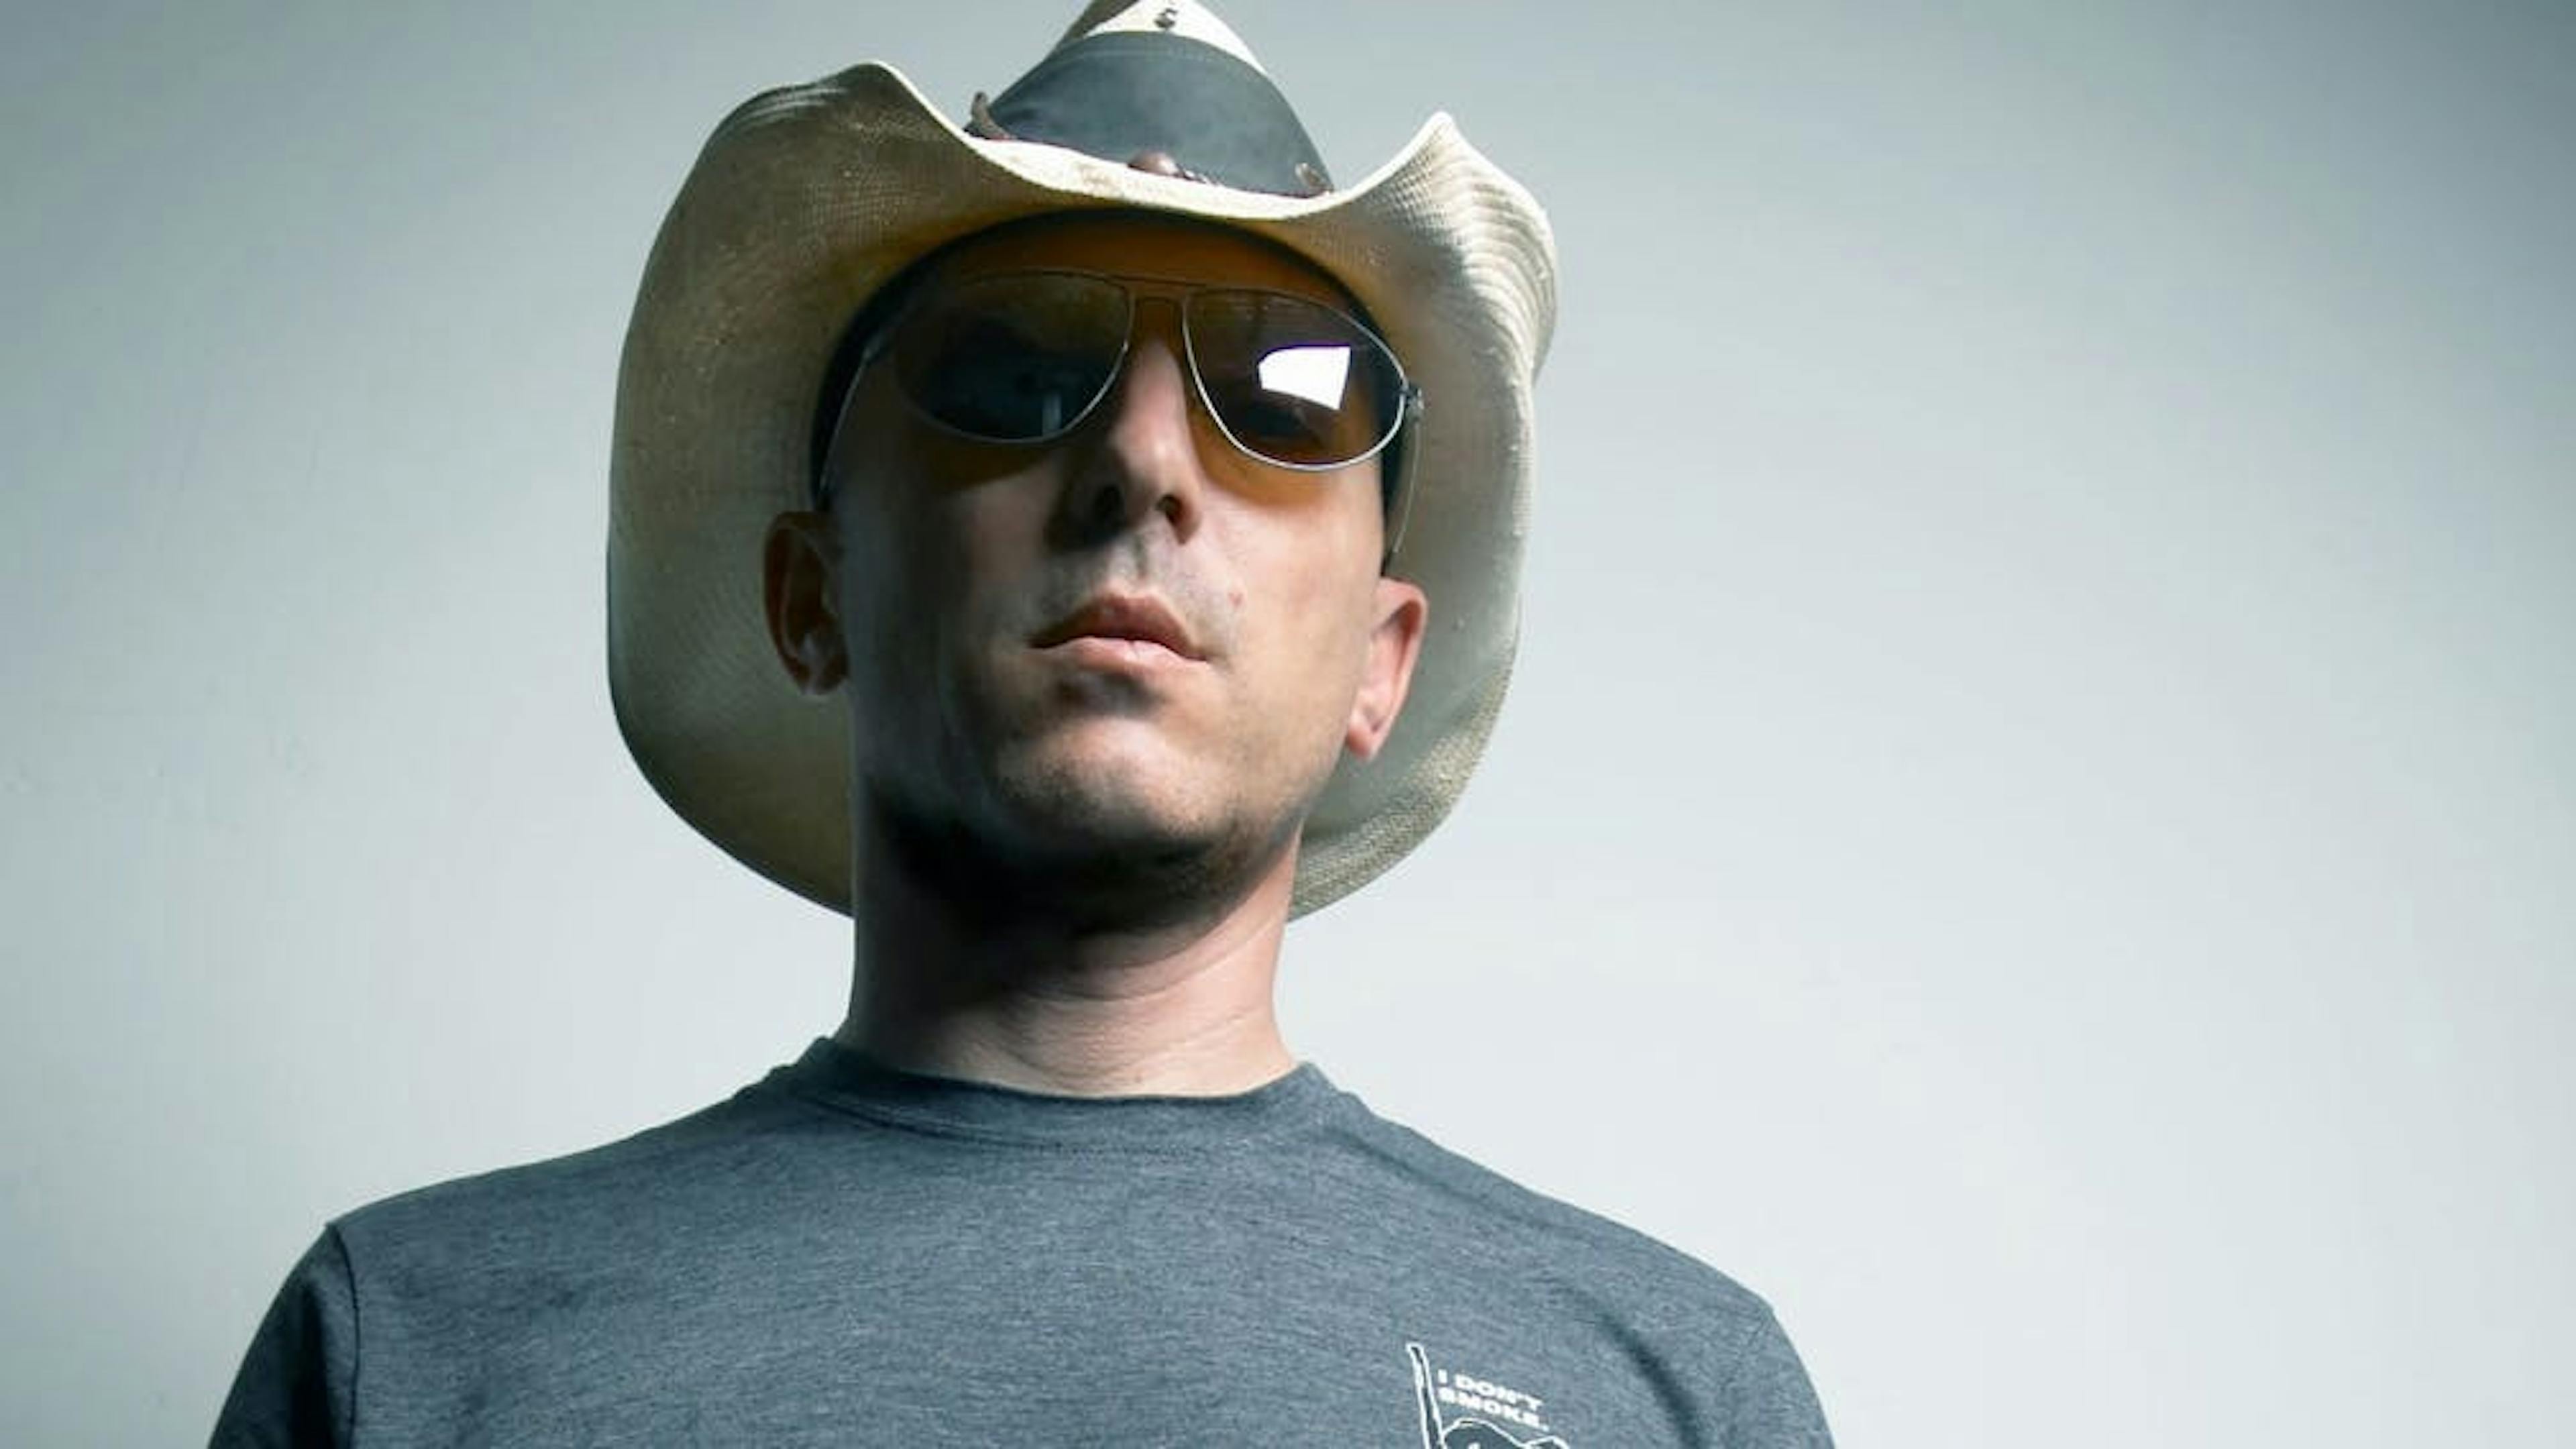 Maynard James Keenan On The State Of The World, And Feeling Hopeful For The Future